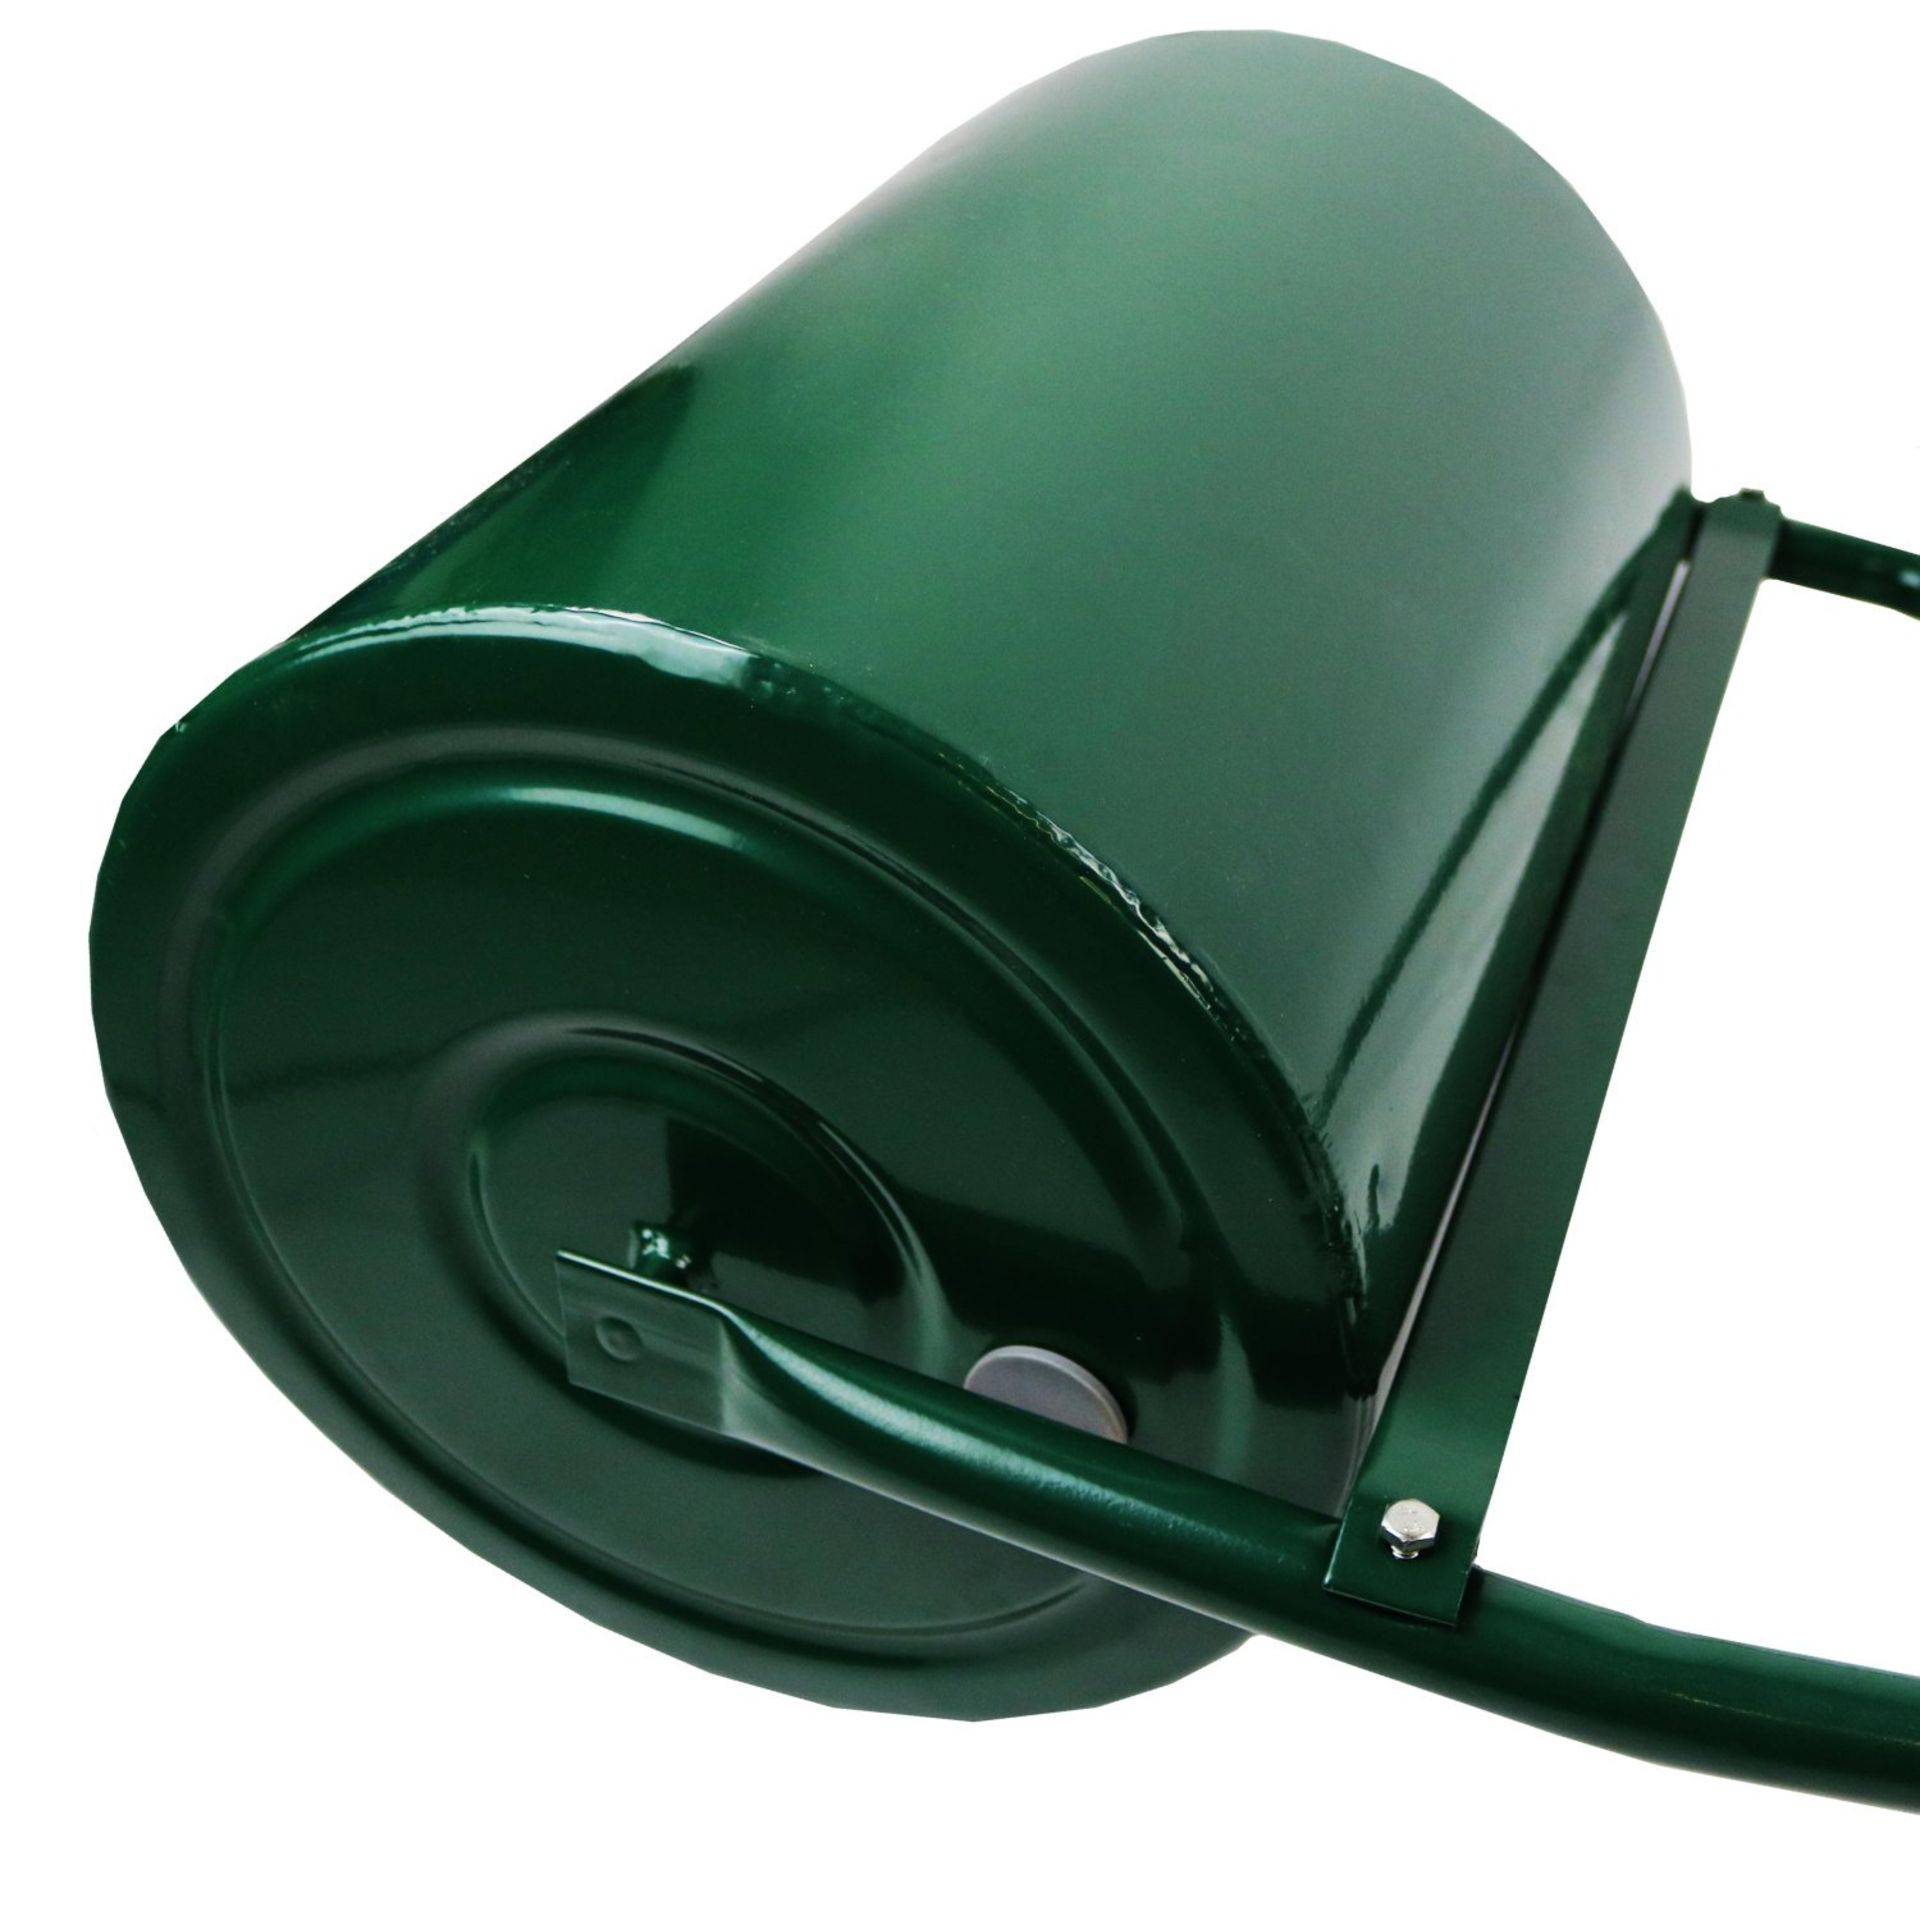 (KK177) 30L Water Filled Garden Lawn Roller This quality galvanised steel roller ... - Image 2 of 2